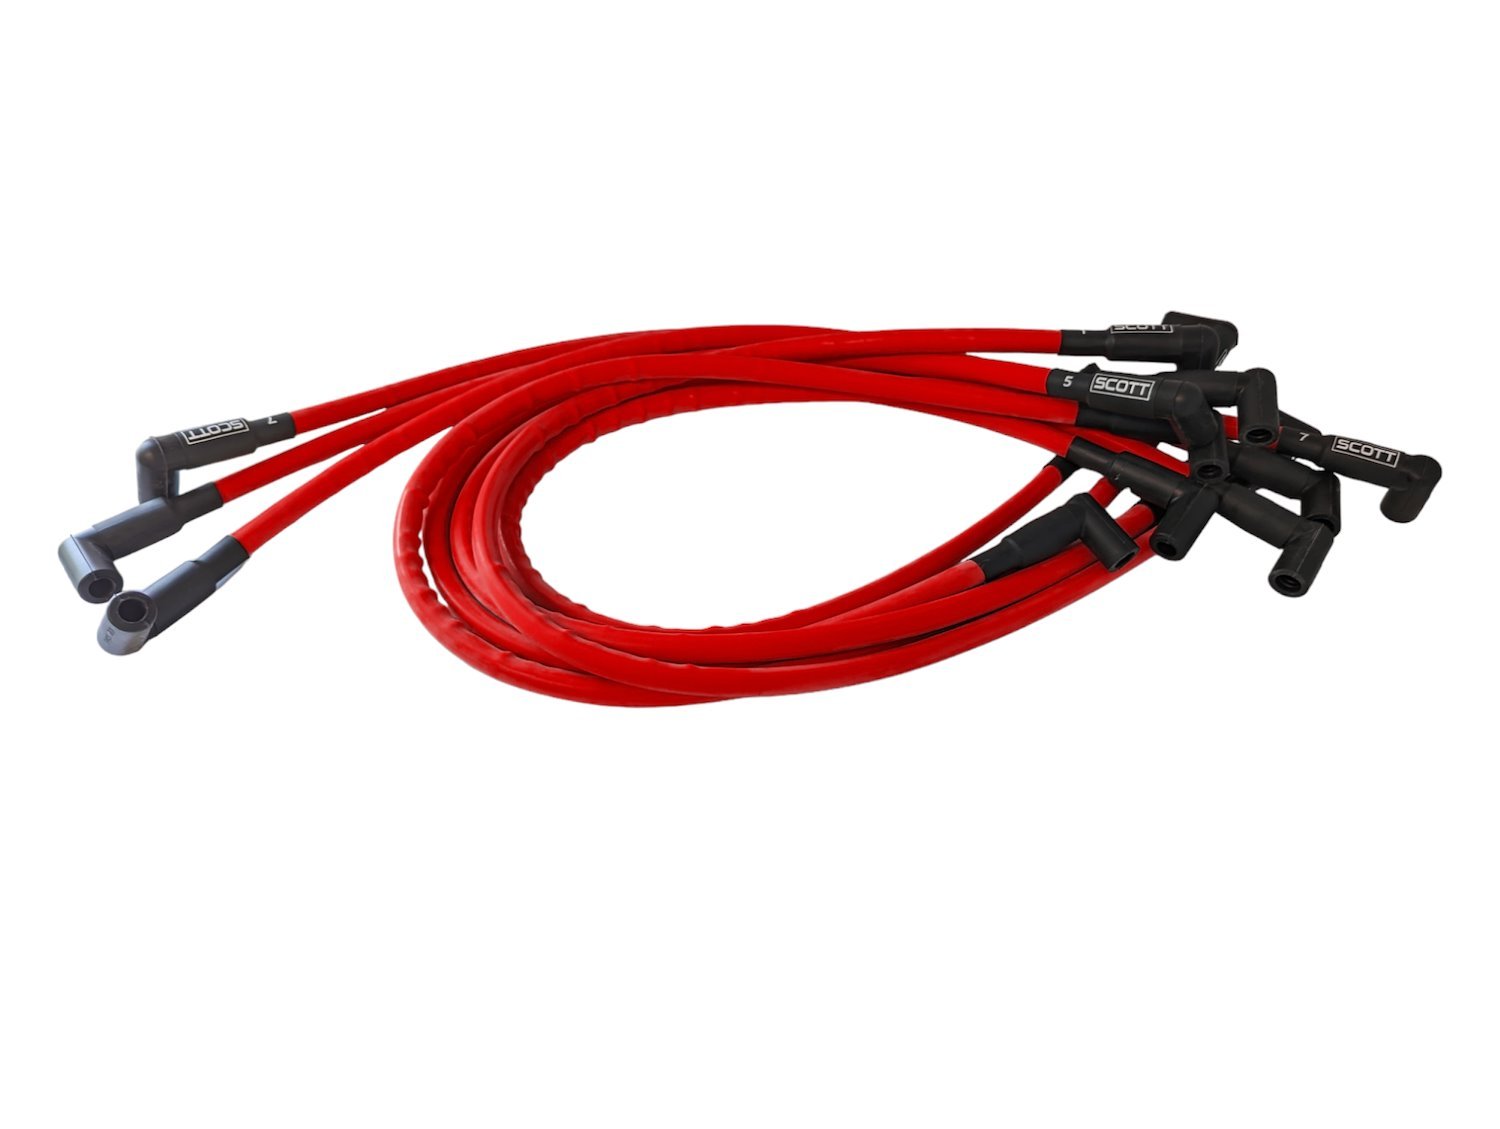 SPW-CH-437-2 High-Performance Silicone-Sleeved Spark Plug Wire Set for Small Block Chevy, Over & Under [Red]